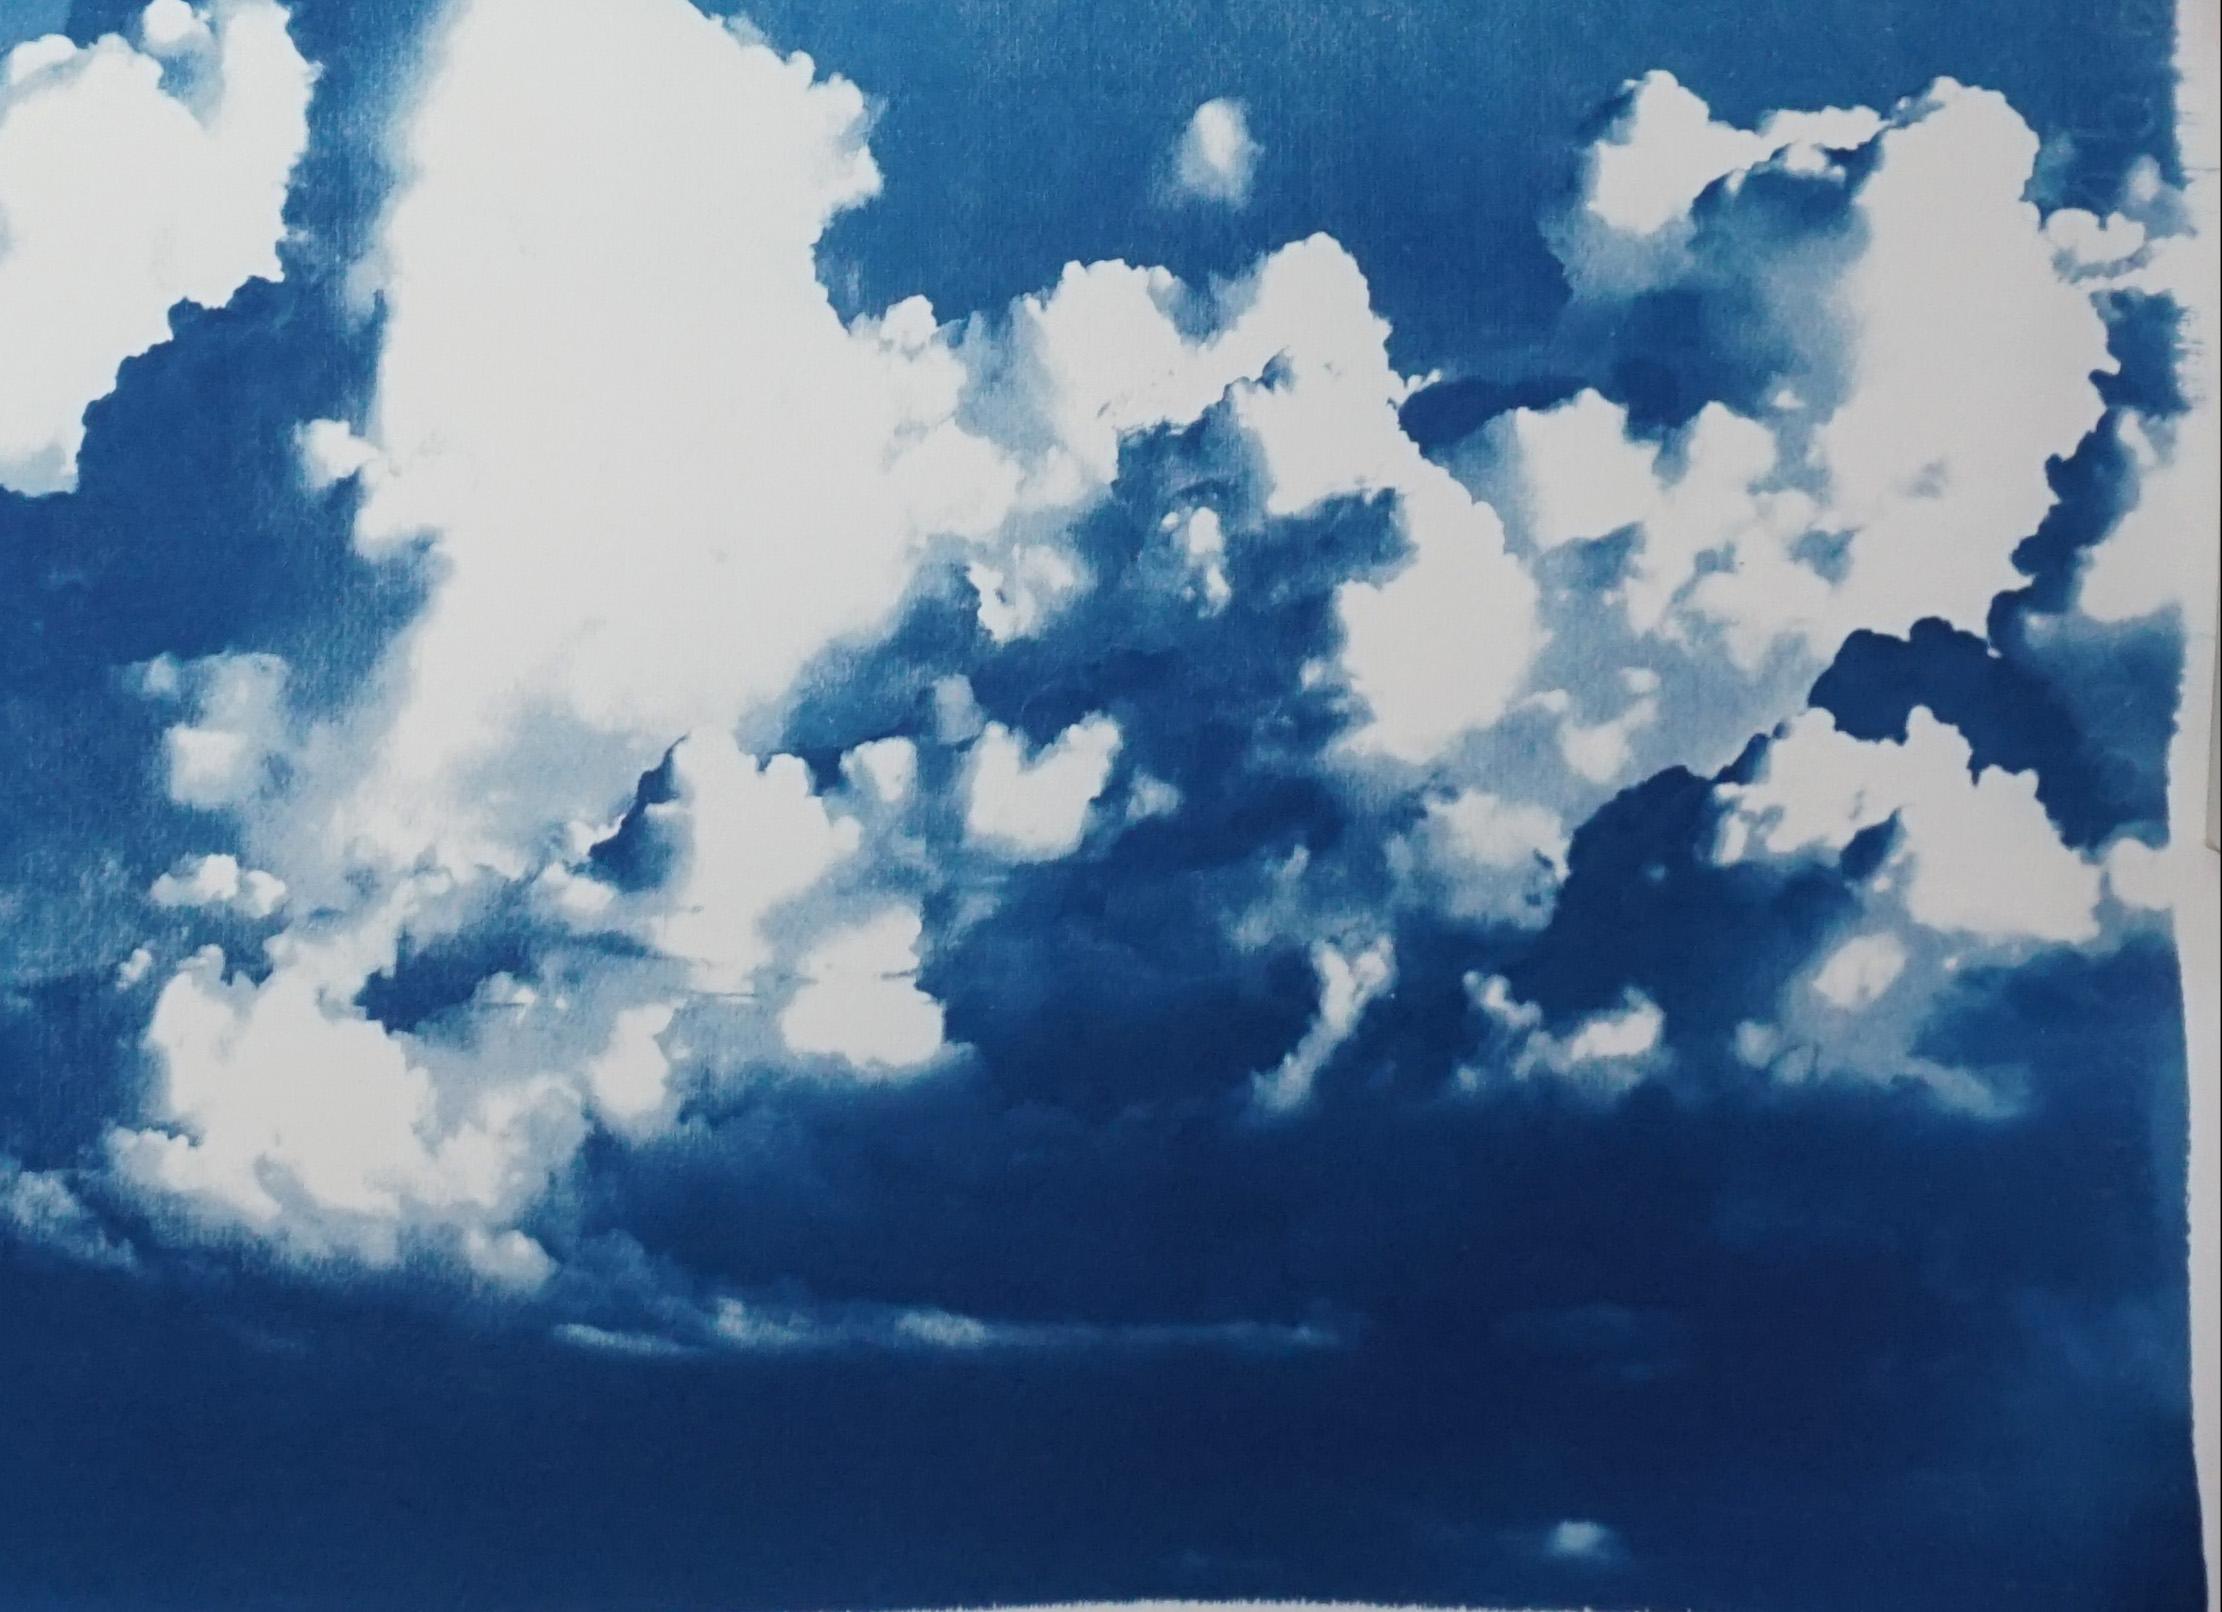 Blustery Clouds After a Storm, Sky Blue Handprinted Cyanotype, Meaningful Scene - Naturalistic Art by Kind of Cyan